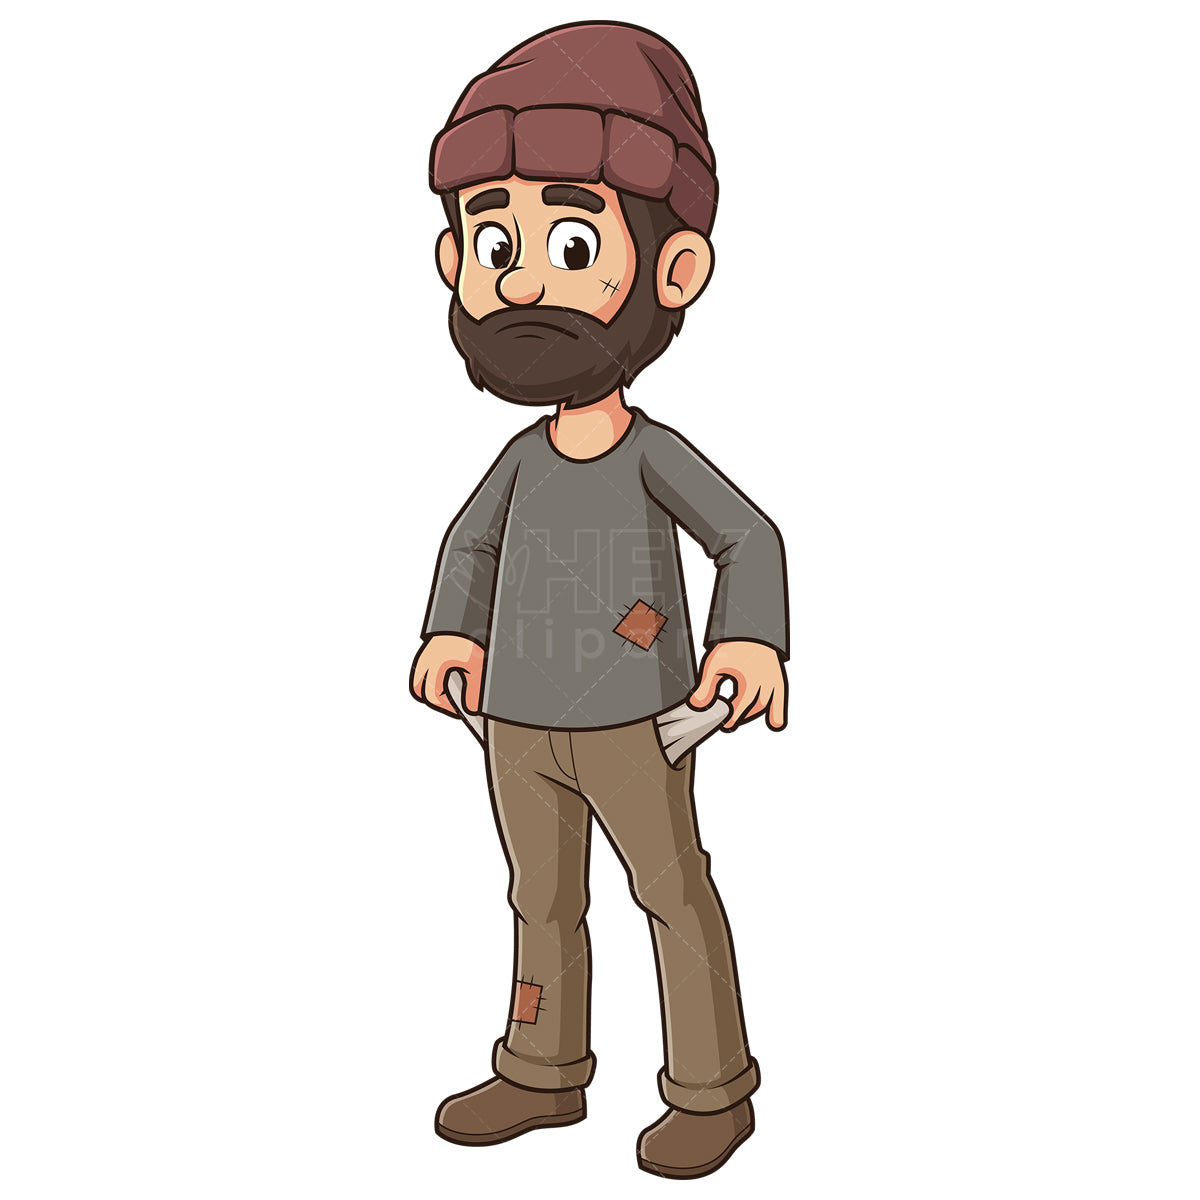 Royalty-free stock vector illustration of a poor man with empty pockets.